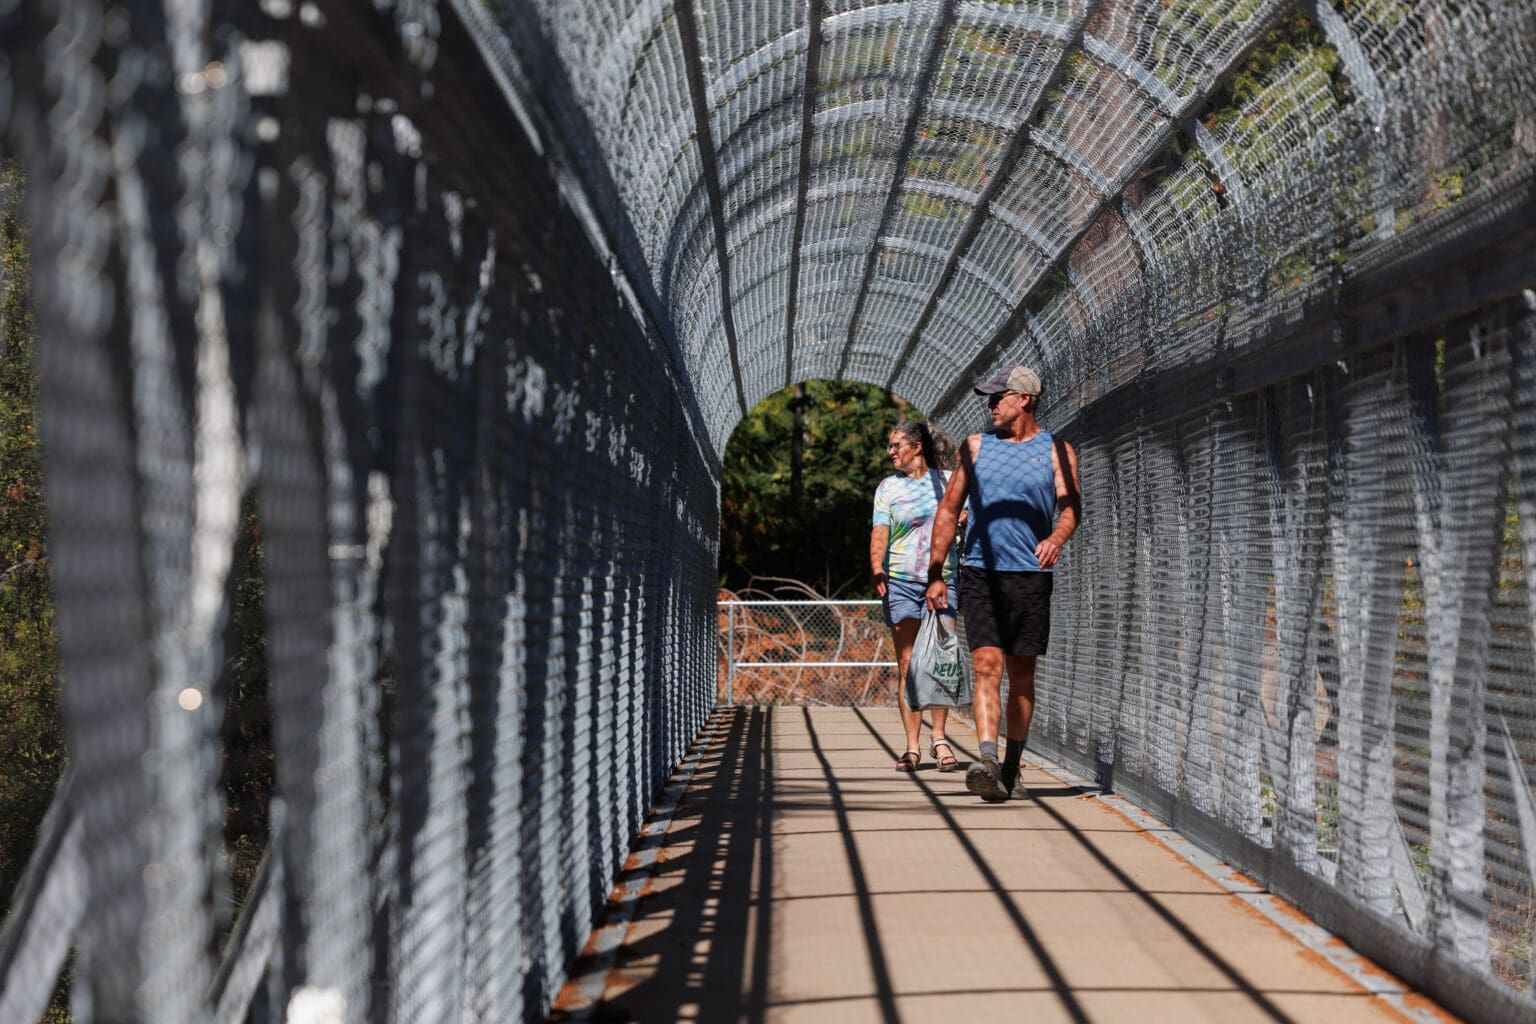 Nick Pate and Melissa Denmark, of Snohomish, walk through the passage between Clayton beach and the Lost Lake parking lot.